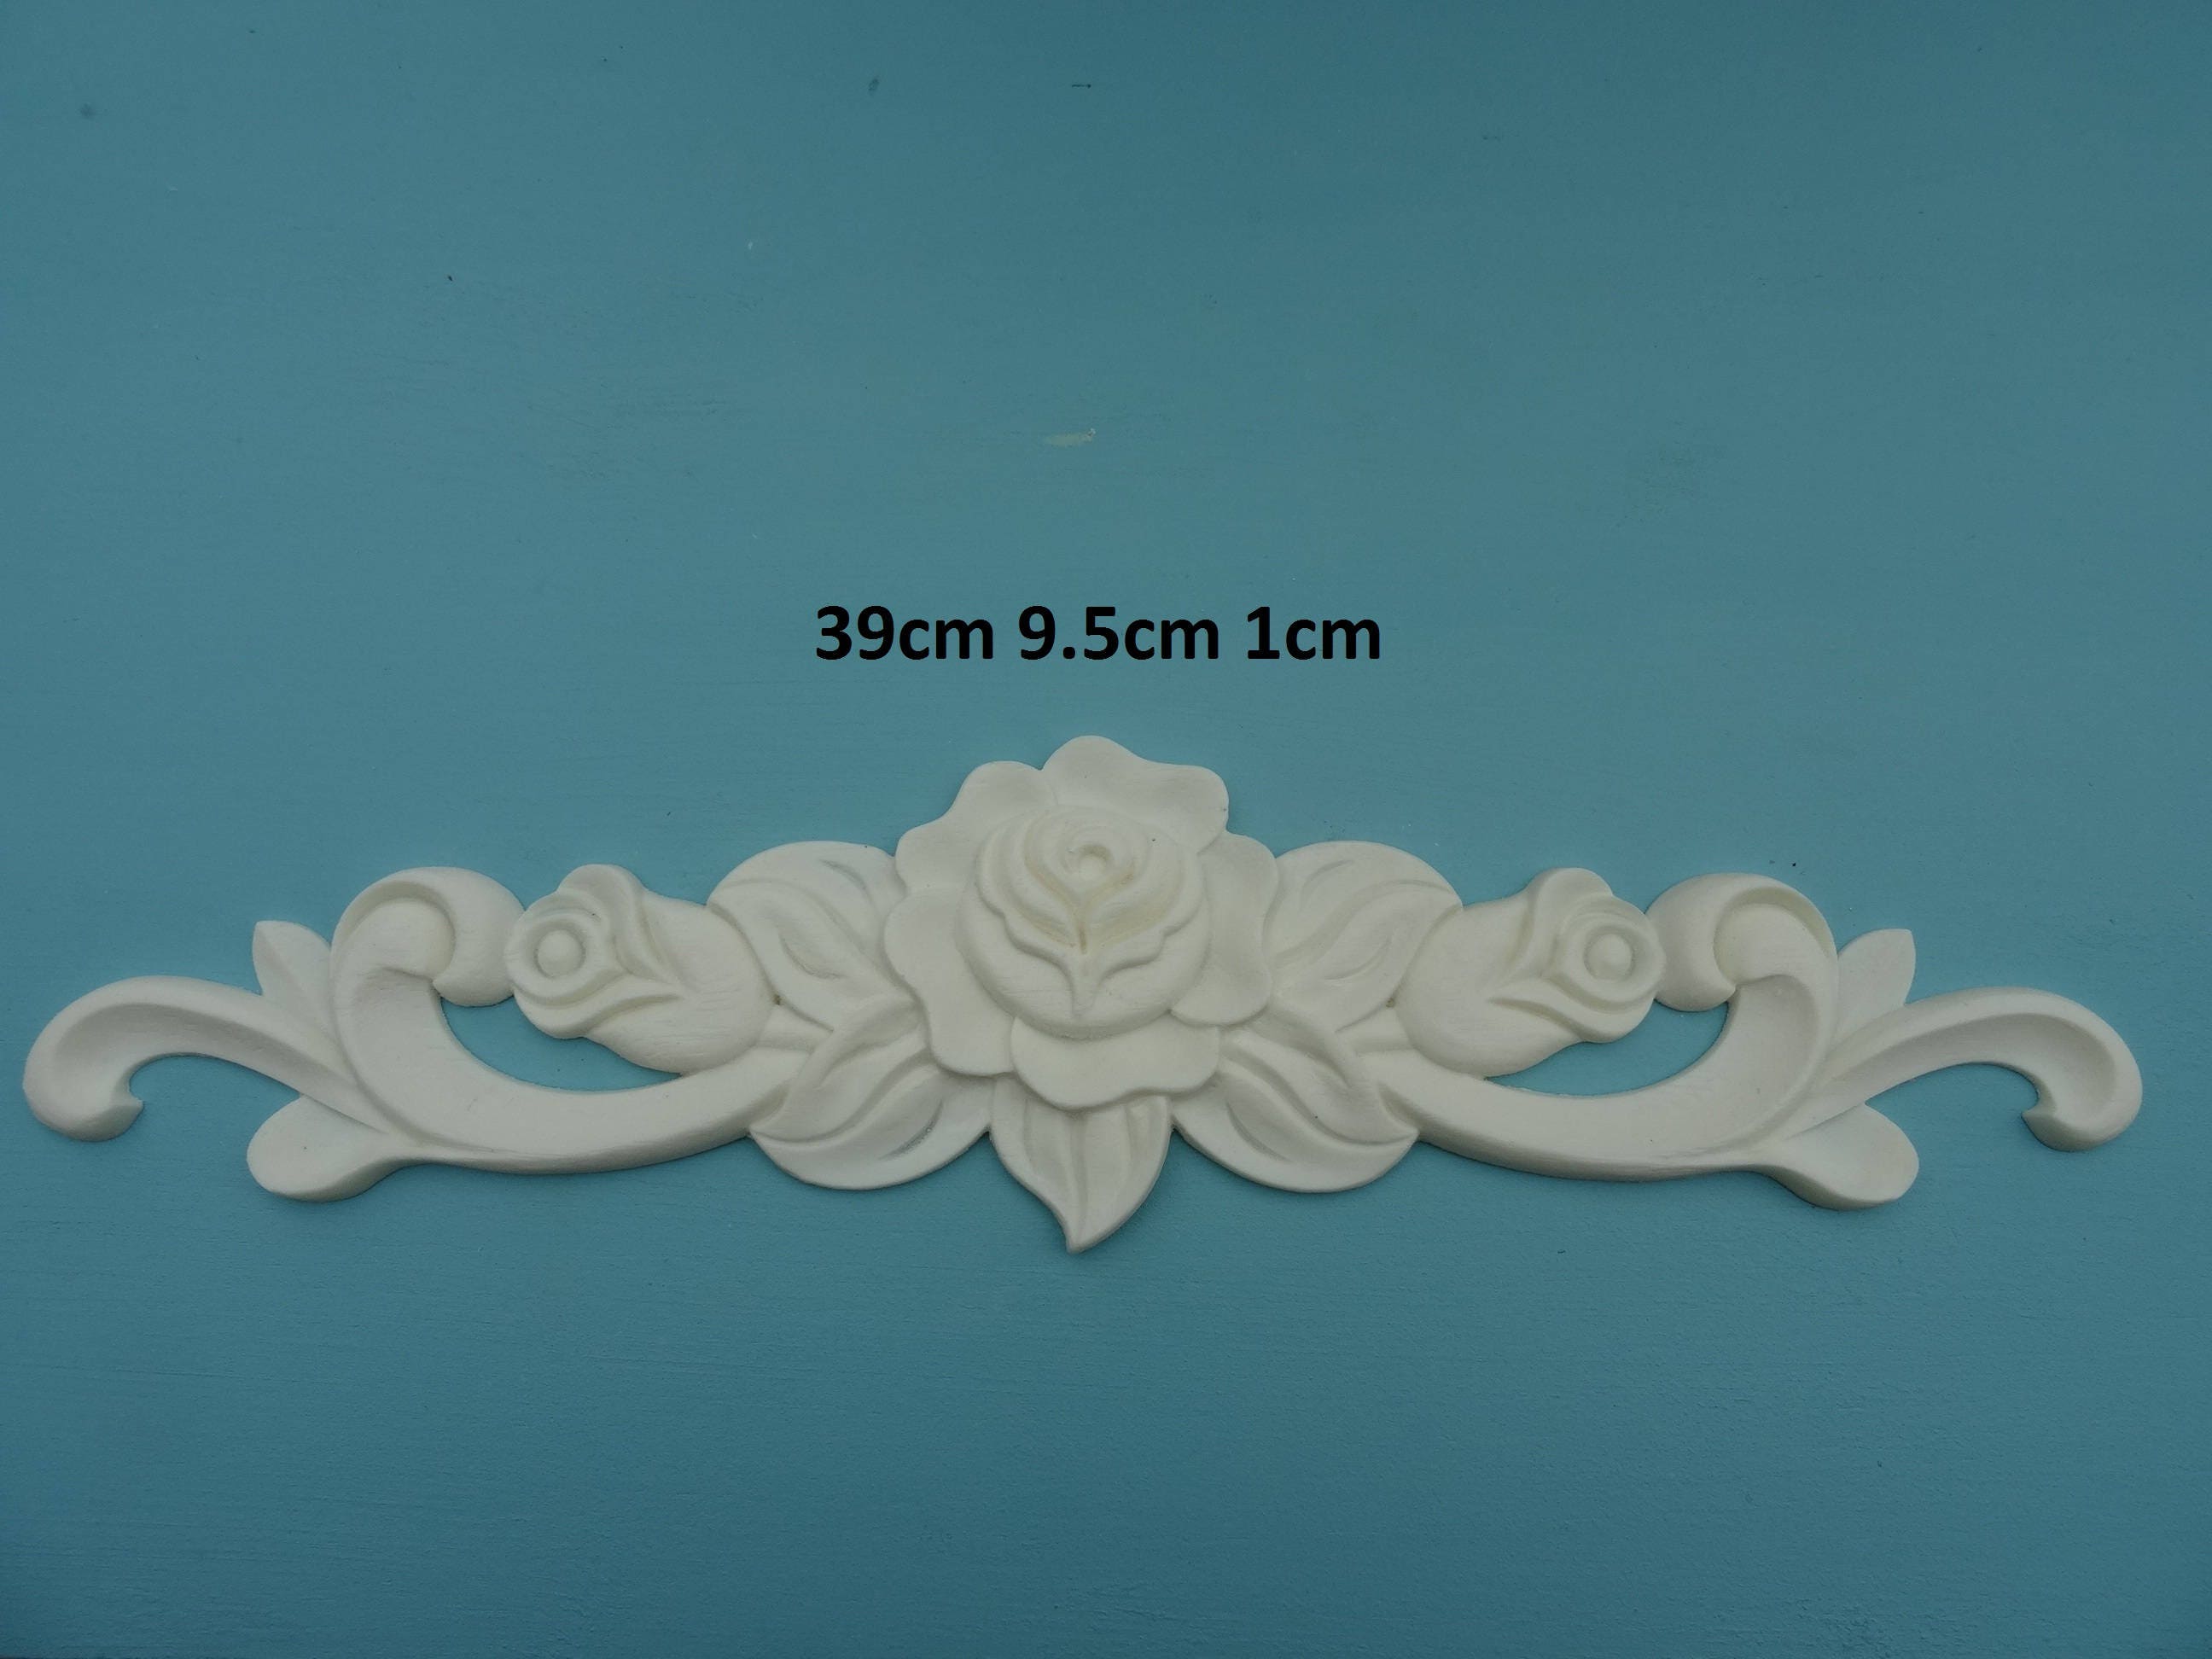 Decorative shell scroll resin furniture mouldings appliques onlays B90 